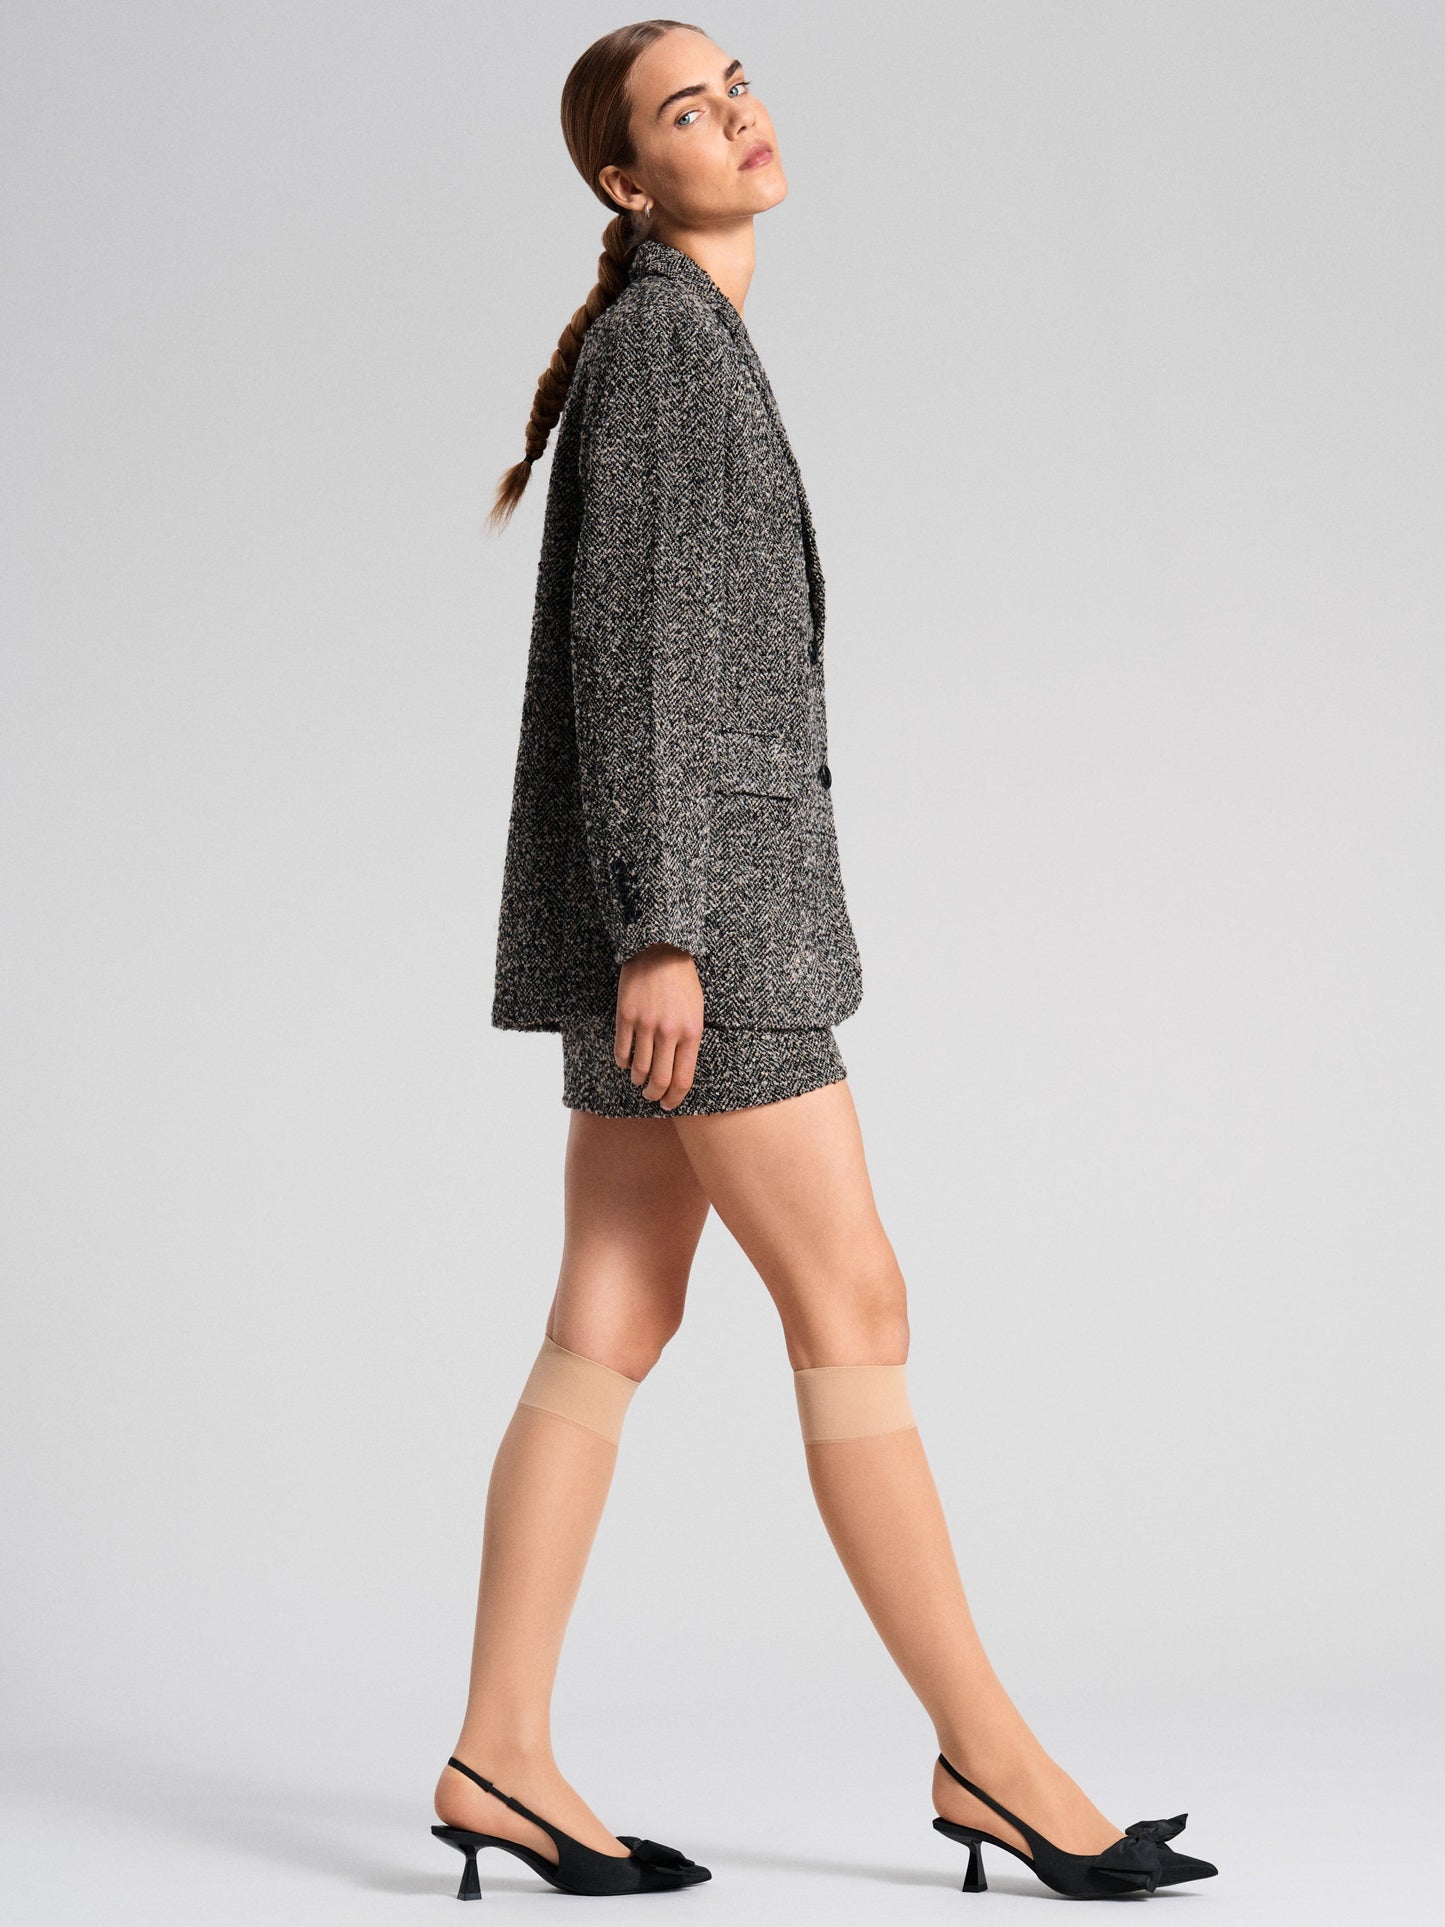 A model strides in nude knee-high socks, teamed with a textured grey blazer and shorts, and black slingback heels, embodying a modern, sophisticated style.